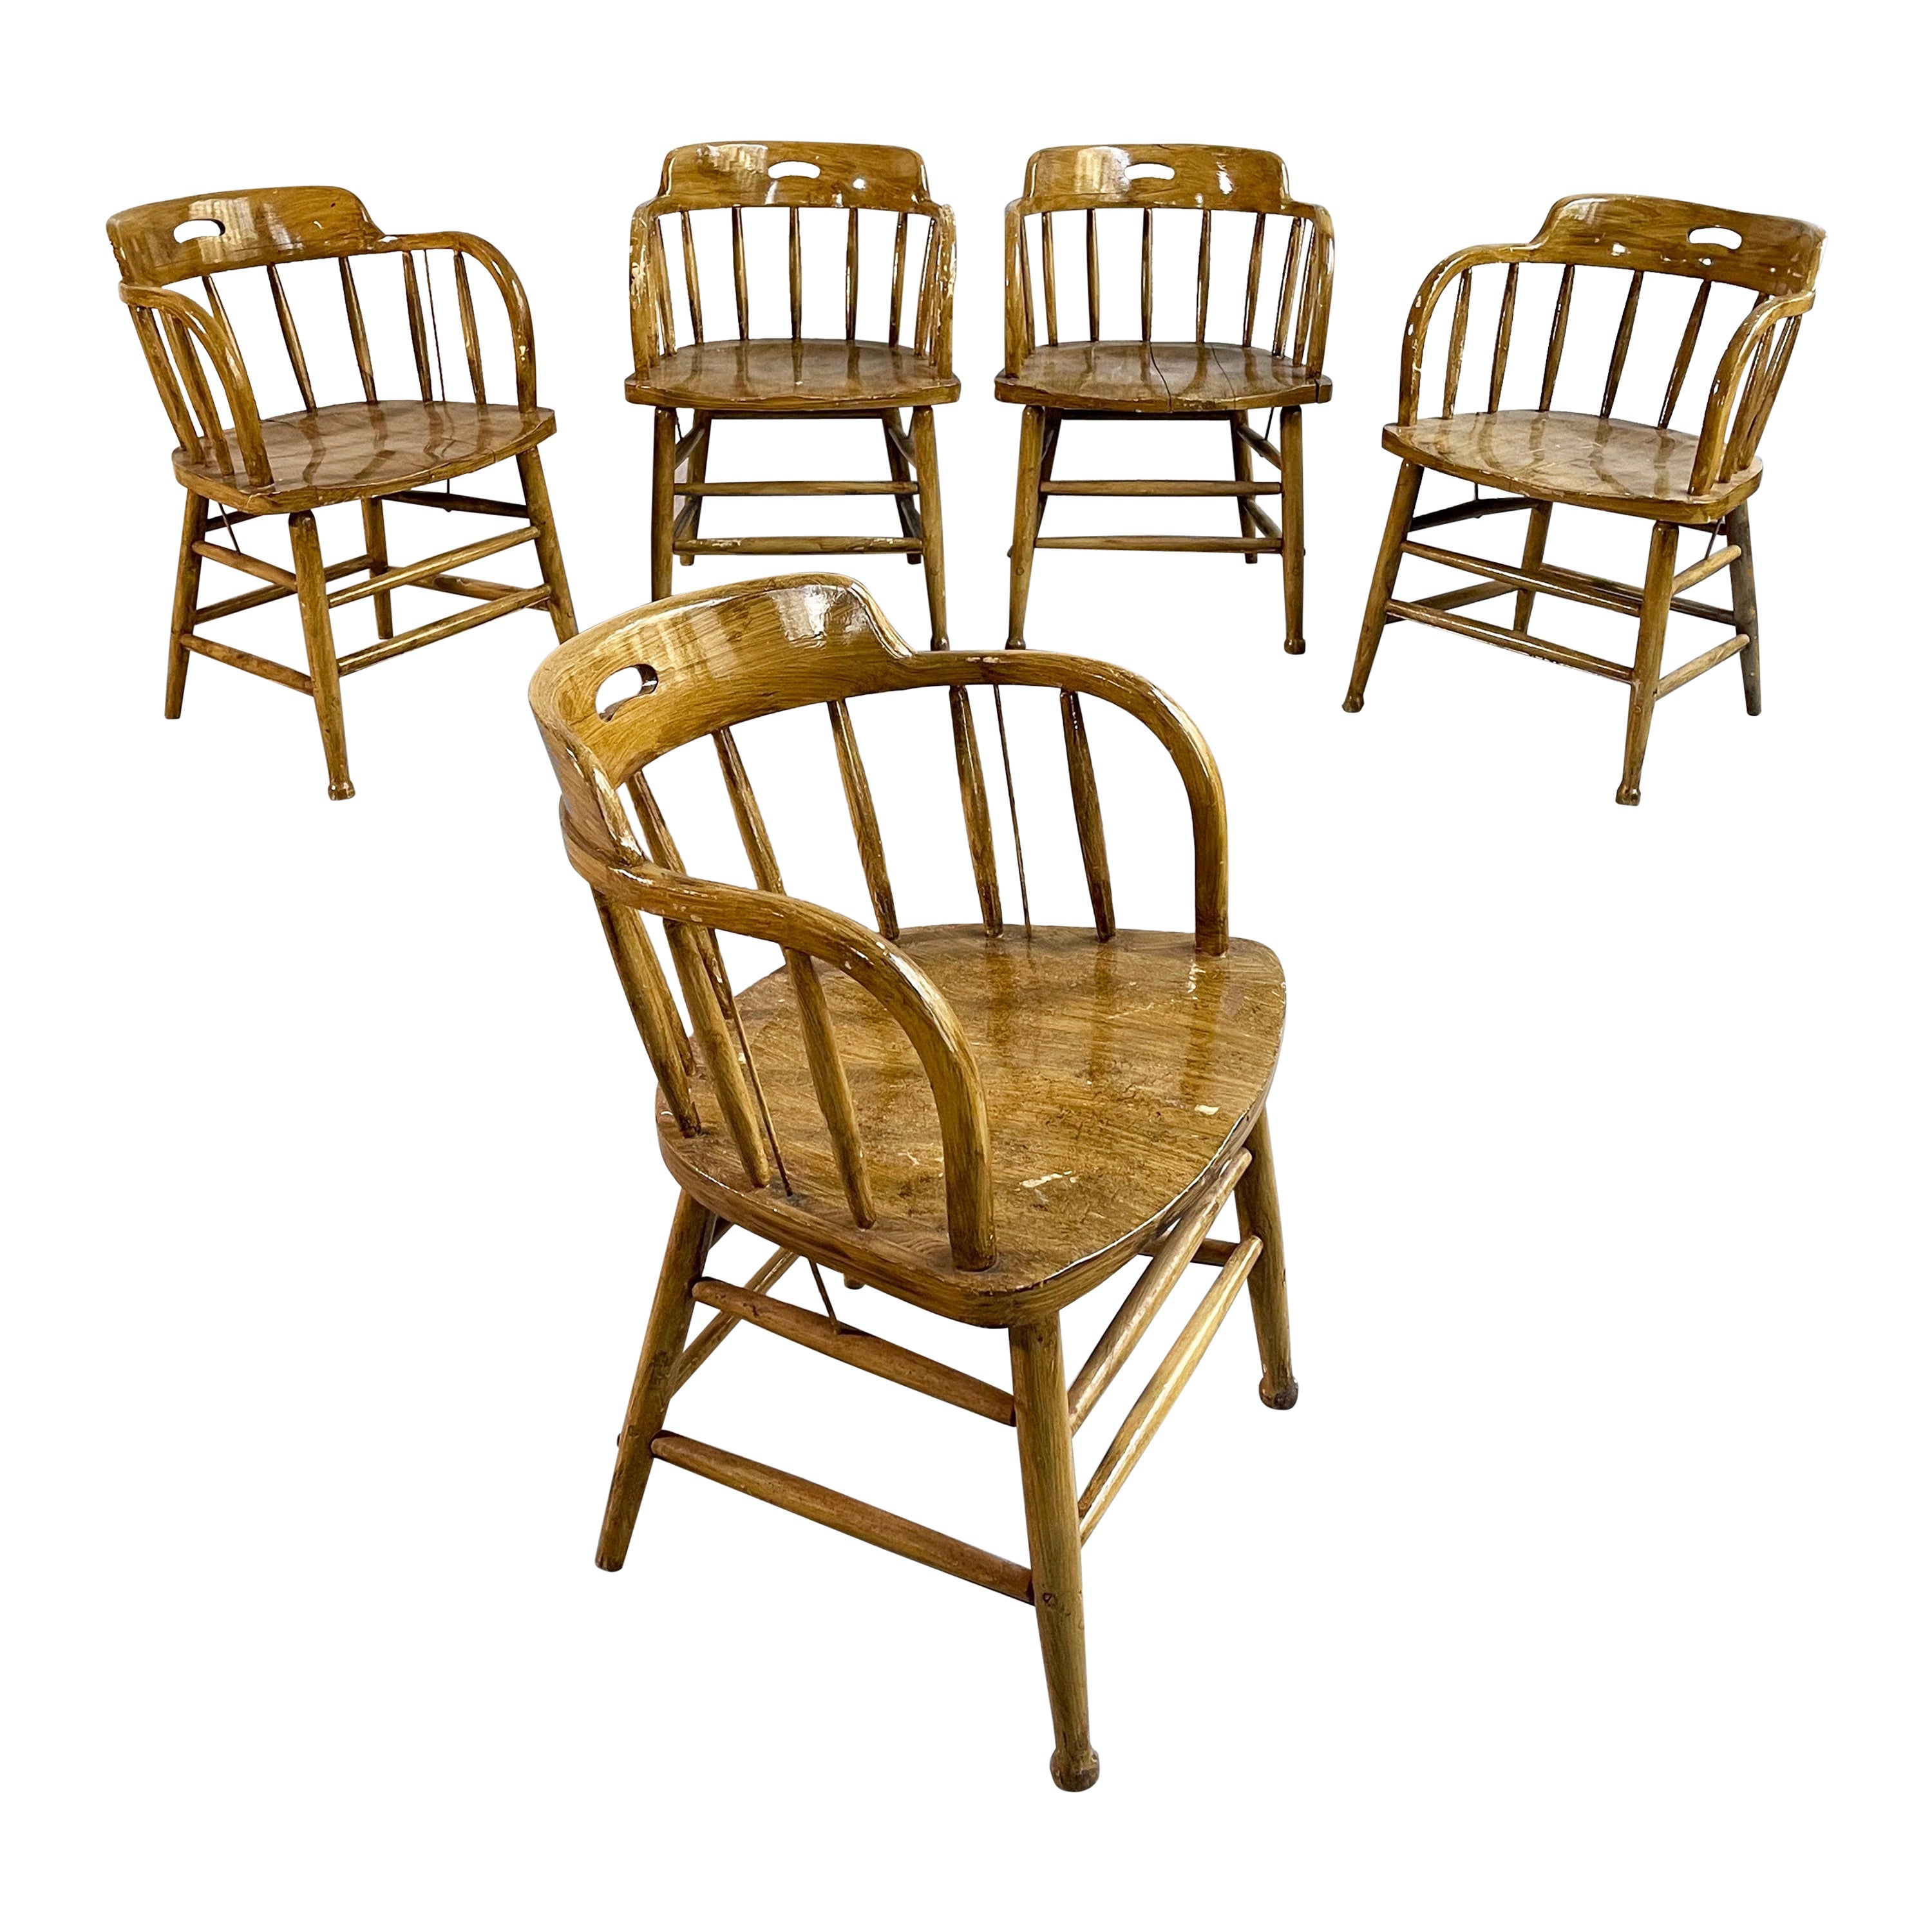 Early 20th Century, Rustic Oak Firehouse Dining Chairs